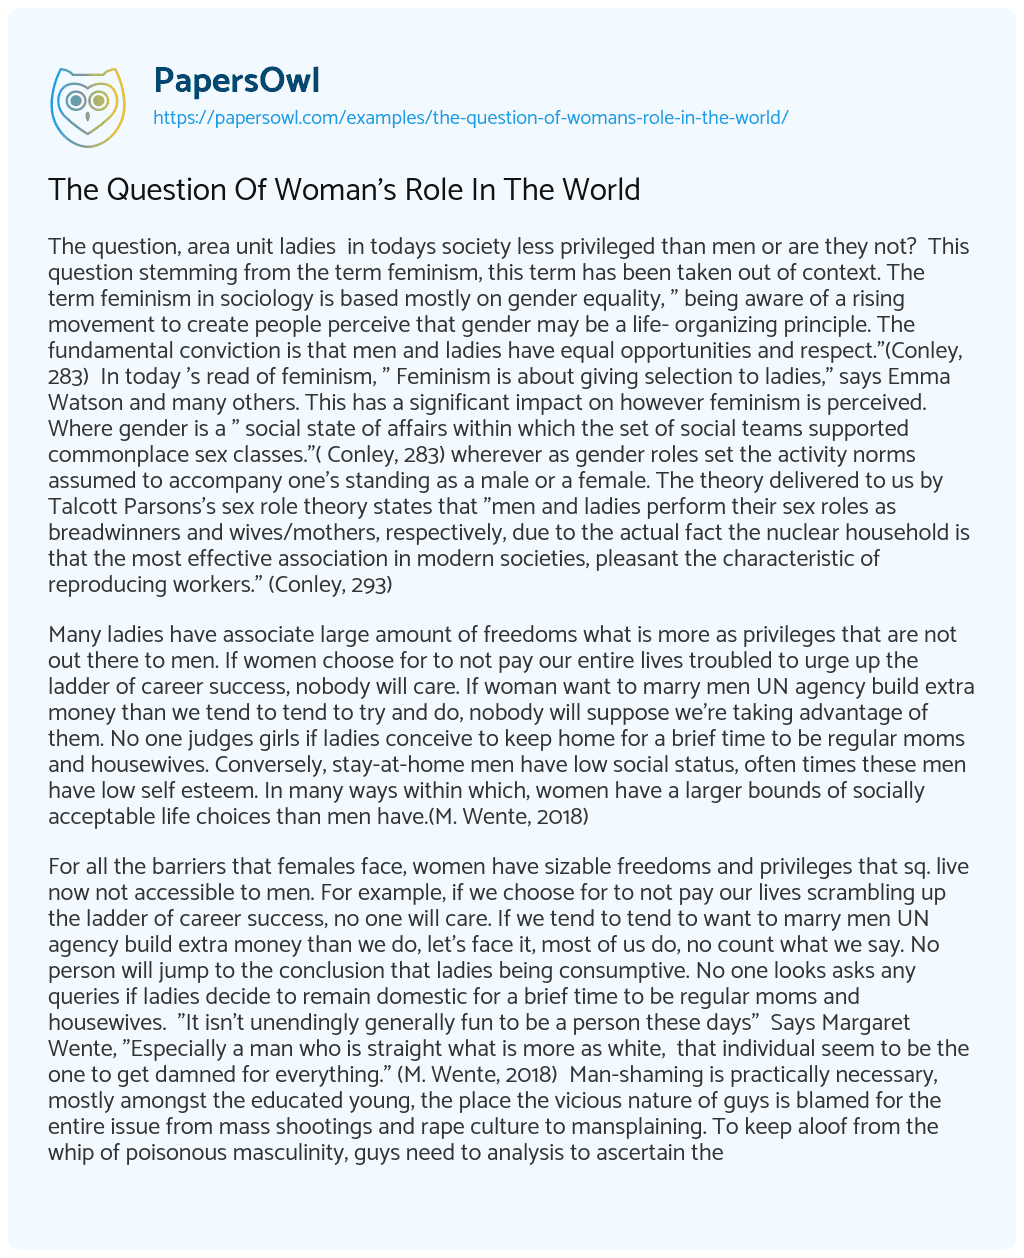 The Question of Woman’s Role in the World essay